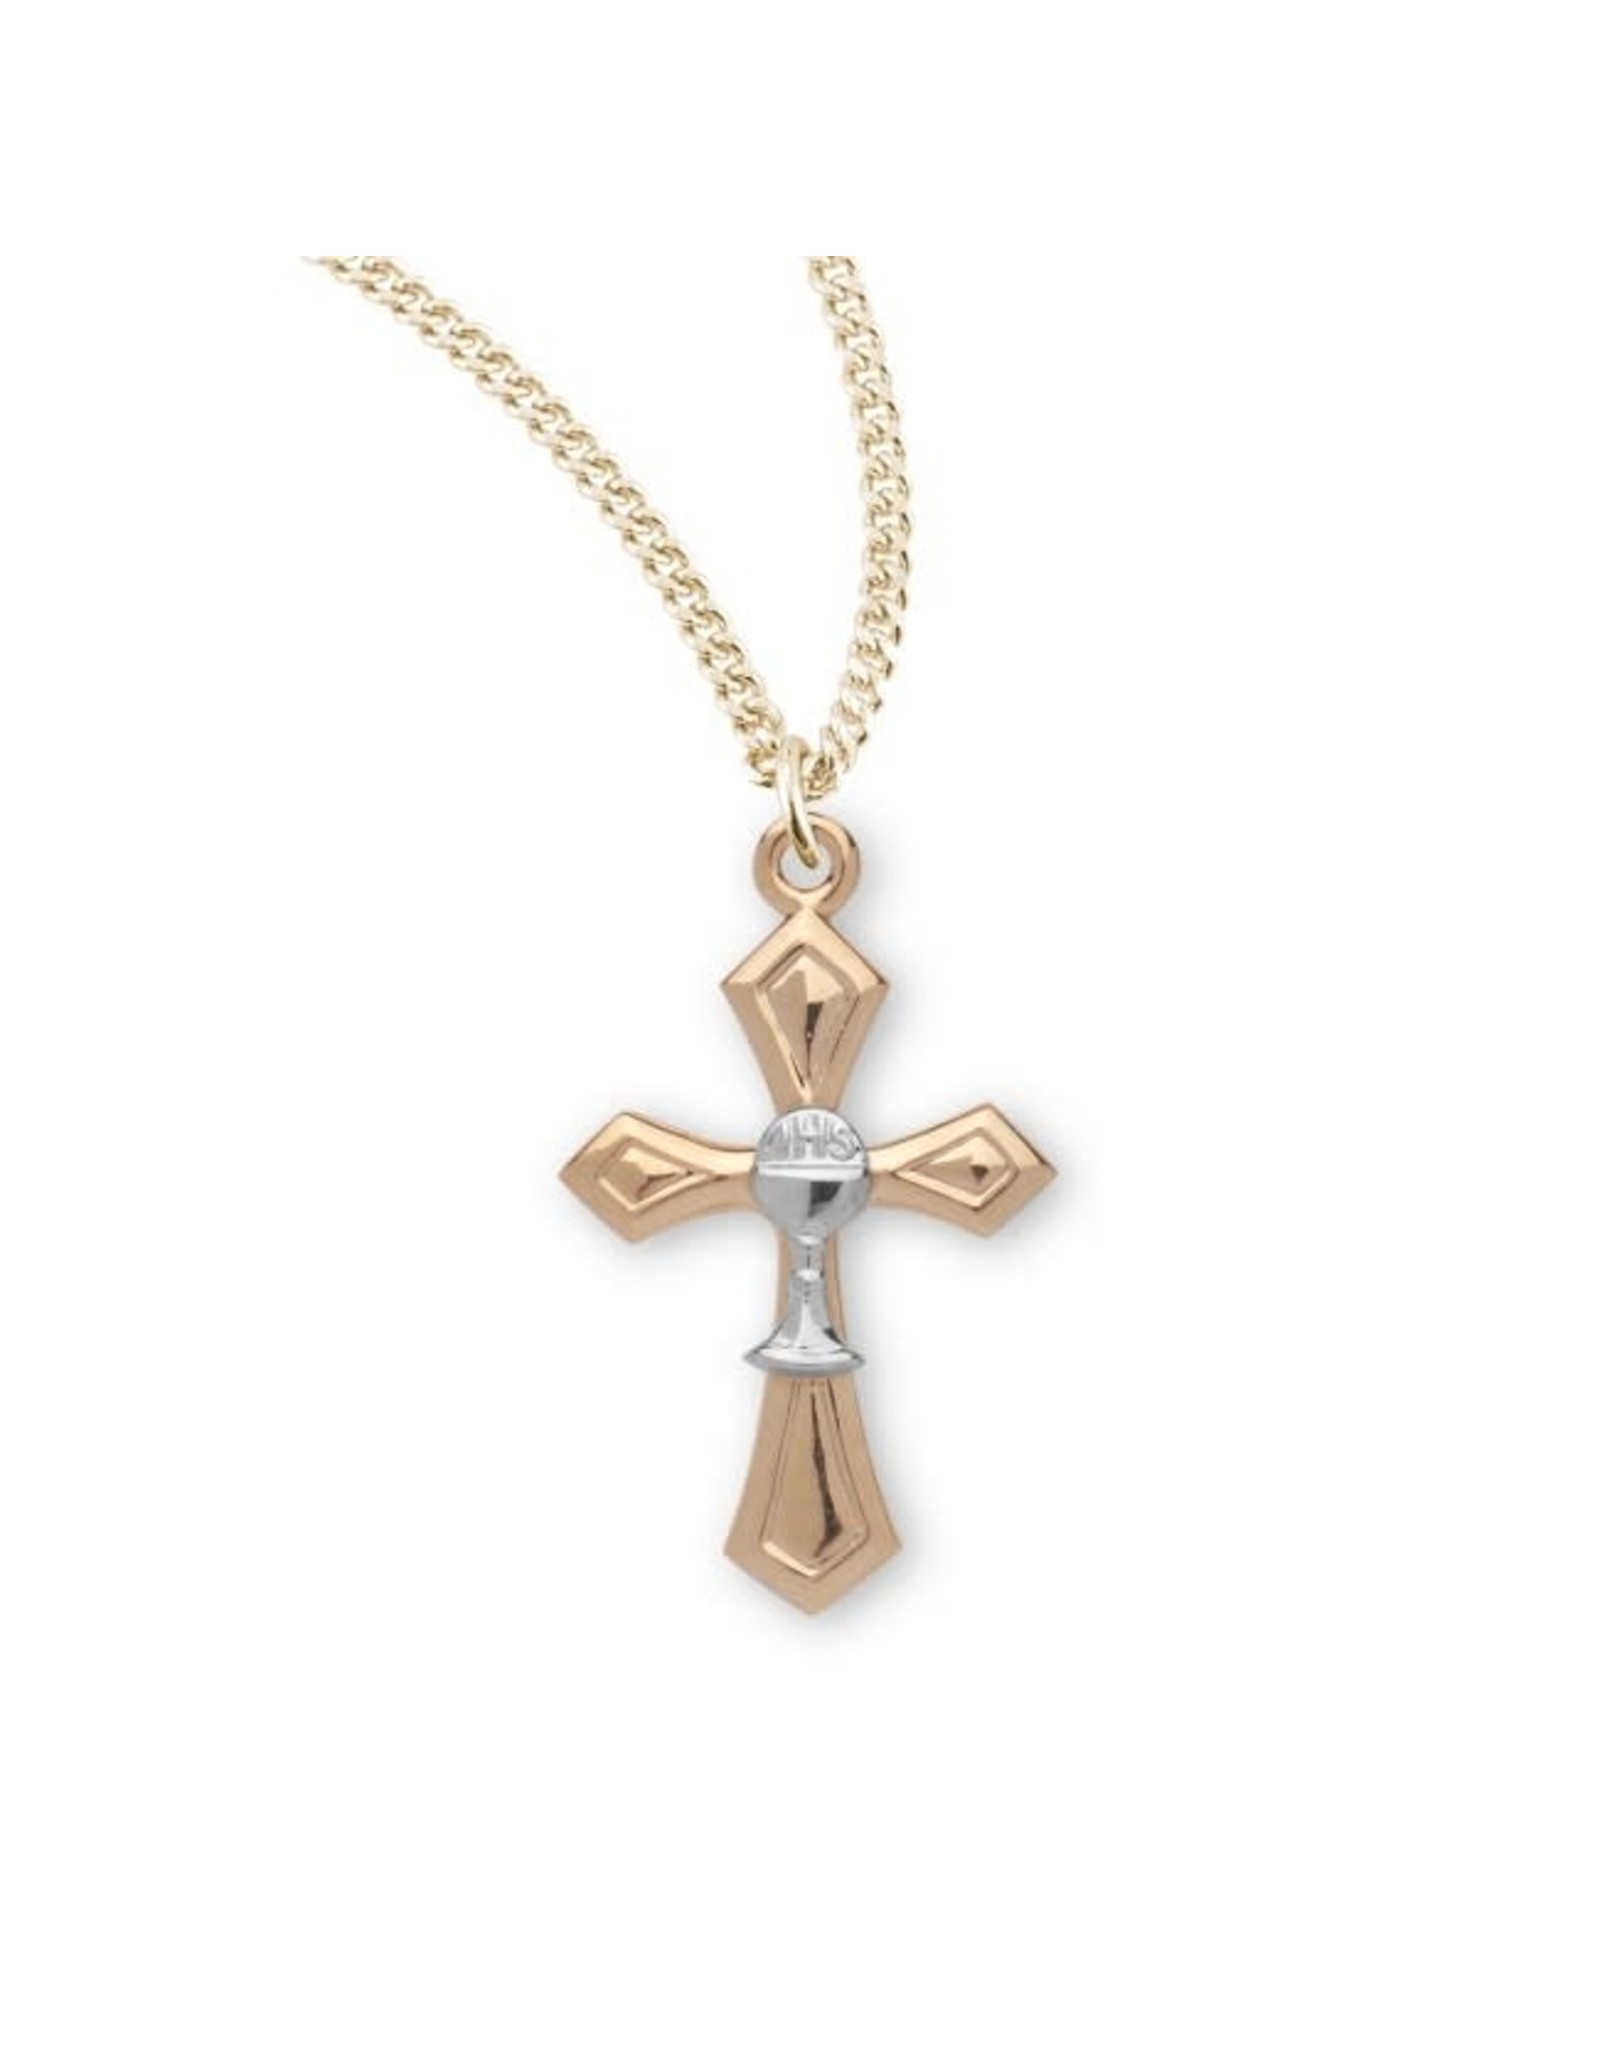 HMH Cross with Chalice Necklace - Two-Tone Gold over Sterling Silver on 18" Chain